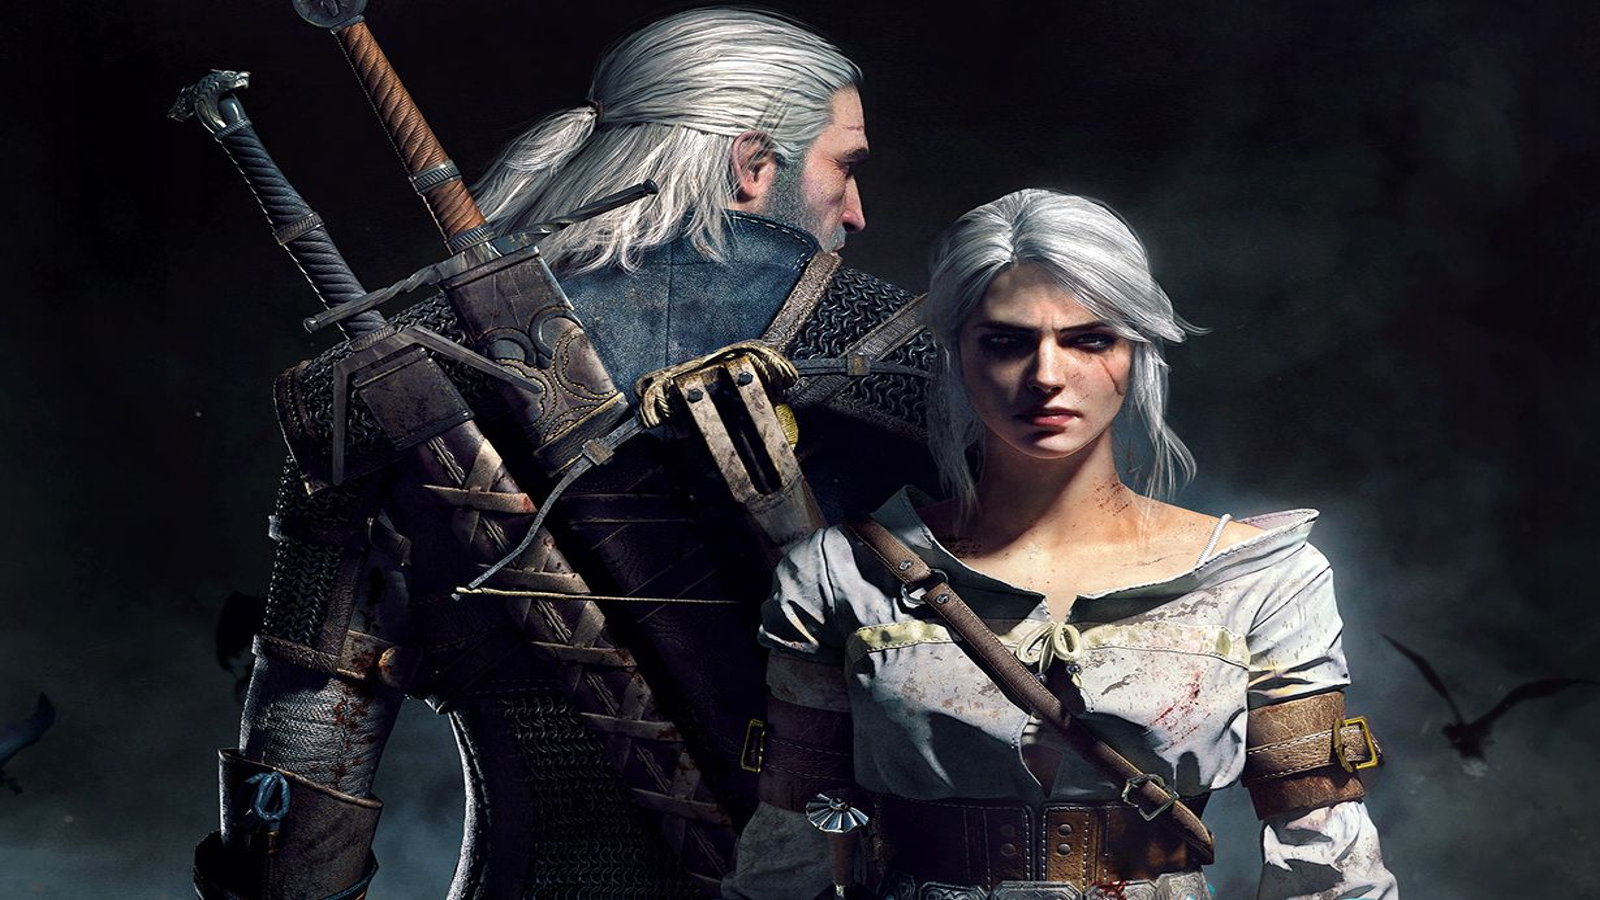 Witcher 3 leads game of the year nominees for 2015 Game Awards - CNET